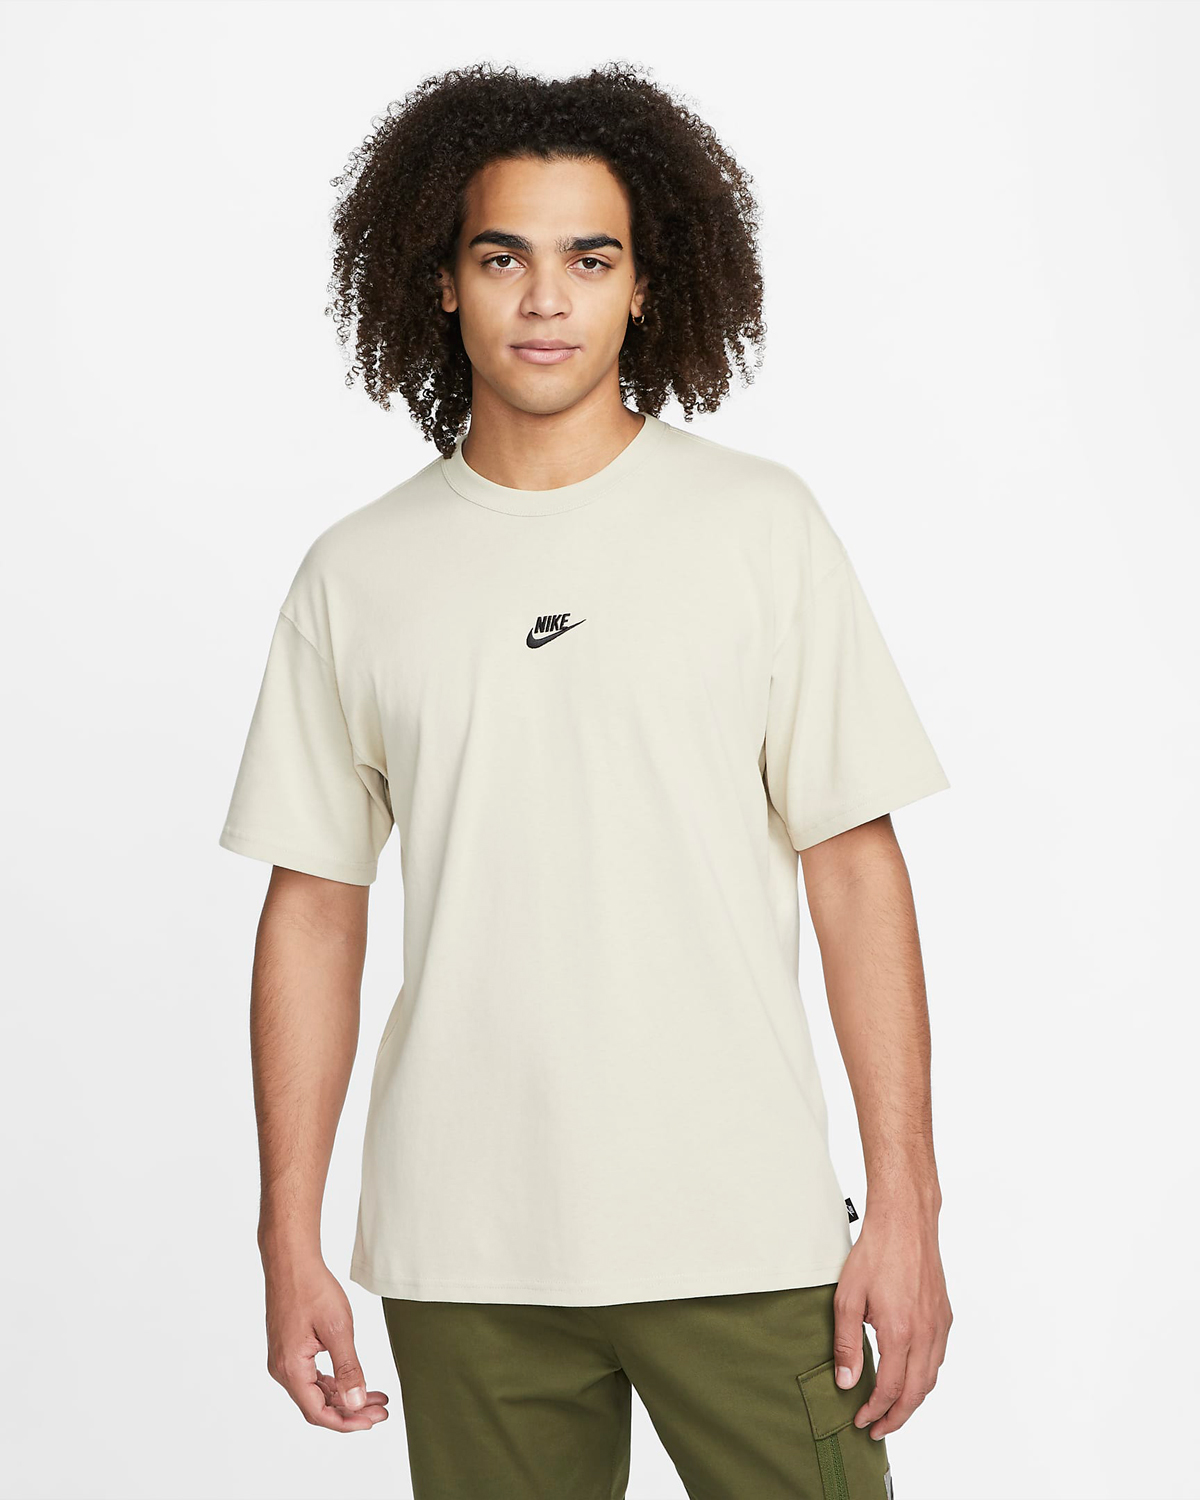 Nike Air Max Penny 1 Rattan Shirts Clothing and Outfits